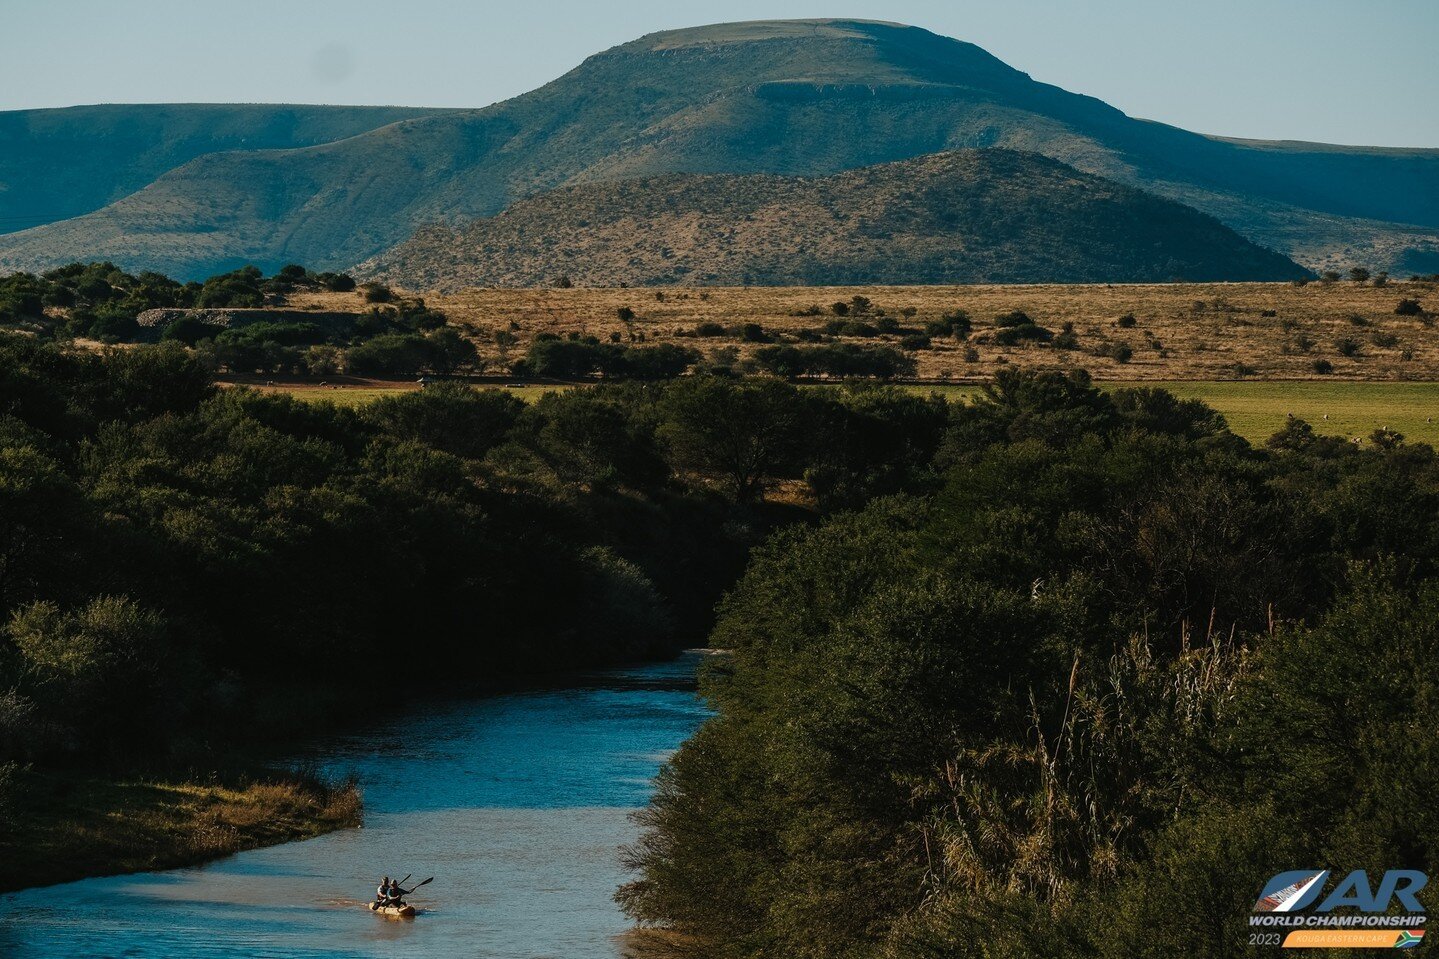 Registration for Expedition Africa opens Nov. 1!!!⁠
⁠
Time to starting planning for the Adventure Racing World Championship 2023 in South Africa.⁠ Accommodations are filling up fast.⁠
⁠
Join ARWS in Africa for an true wilderness adventure and celebra